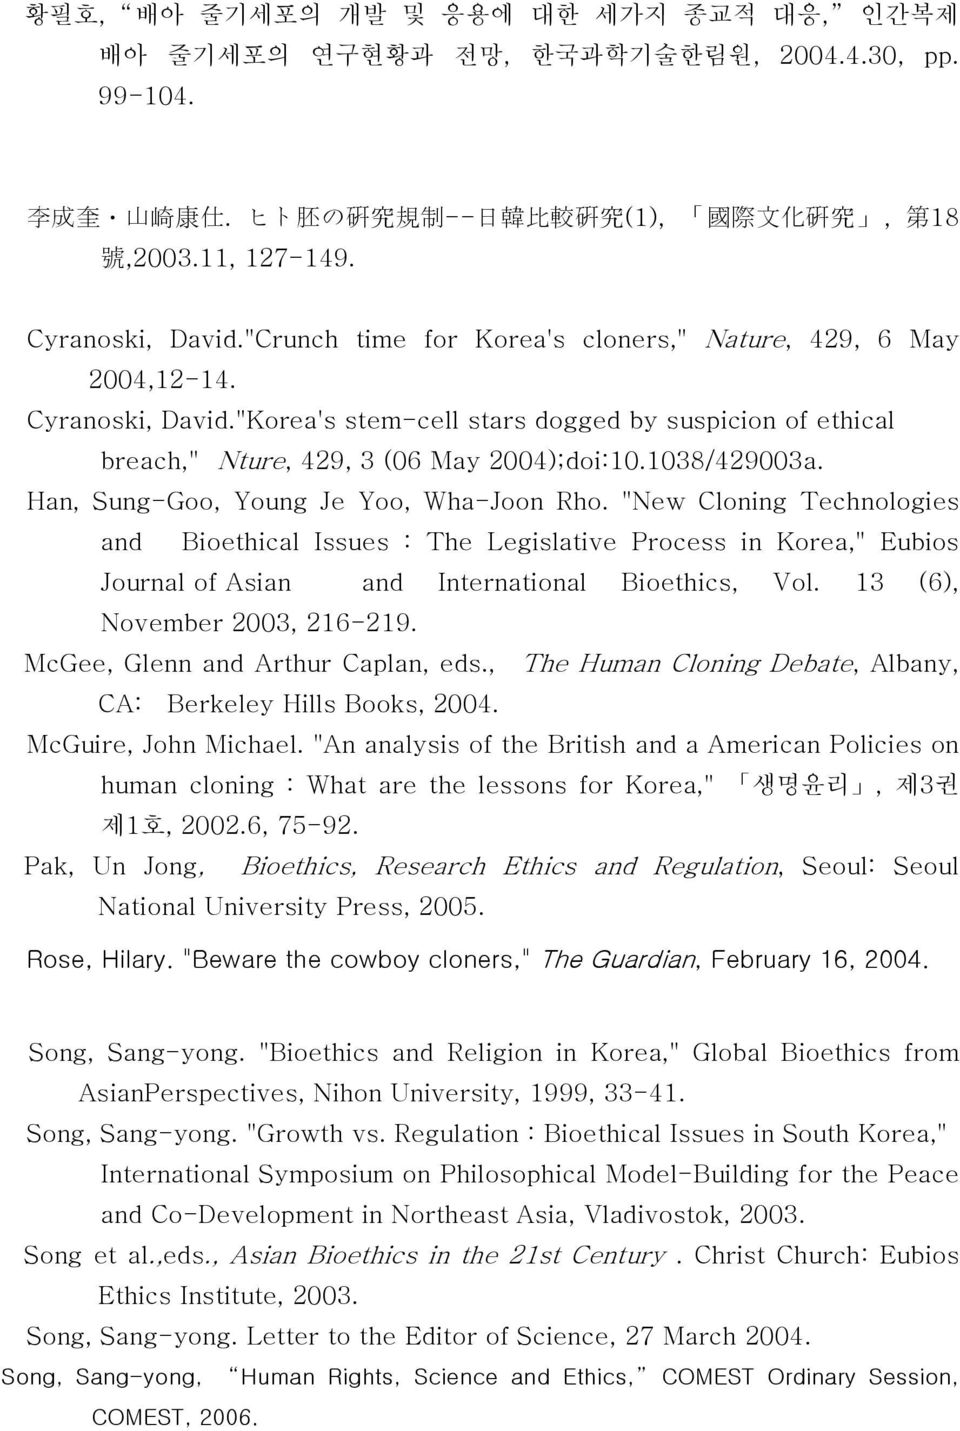 1038/429003a. Han, Sung-Goo, Young Je Yoo, Wha-Joon Rho. "New Cloning Technologies and Bioethical Issues : The Legislative Process in Korea," Eubios Journal of Asian and International Bioethics, Vol.